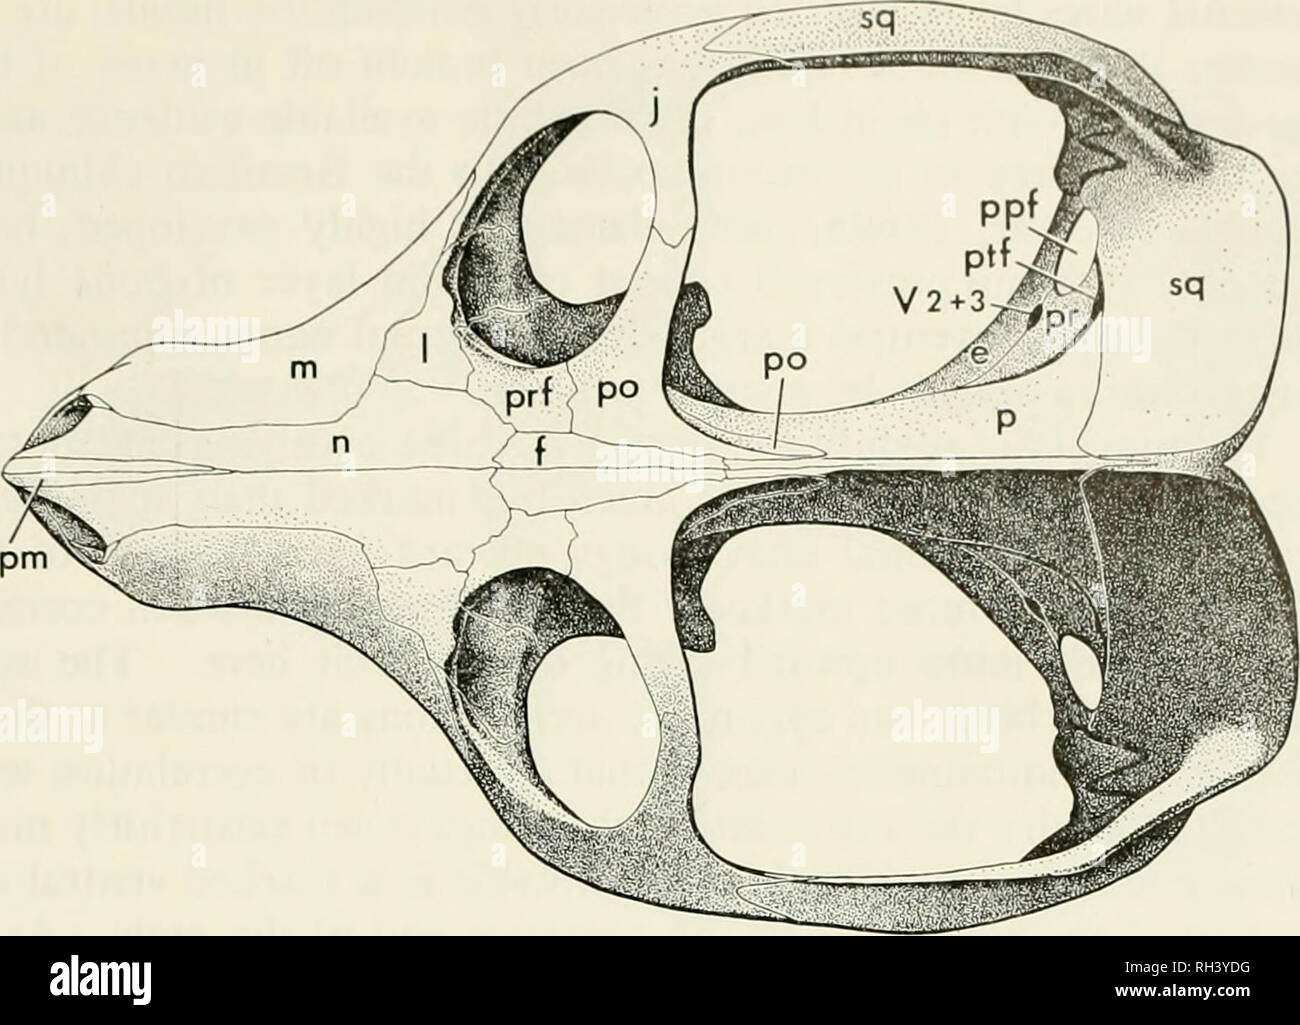 . Breviora. 1970 PROBAINOGNATHUS JENSENI. Fig. 1. Dorsal view of the skull of Probainognathiis. This and Figs. 2-3, 5-8 are composites, about the size of the holotype. Abbreviations for Figs. 1-3 and 5-8: a, articular; an, angular; bo, basioccipital; hs, basisphen- oid and parasphenoid; c, coronoid; d, dentary; e, epipterygoid; /, frontal; fo, fenestra ovalis; /, jugal; jf, jugular foramen; /, lacrimal; m, maxilla; n, nasal; oc, occipital complex; p, parietal; pap, paroccipital process; pi, pala- tine; pm, premaxilla; po, postorbital; pp, postparietal; ppf, pterygoparocci- pital foramen; pr, p Stock Photo